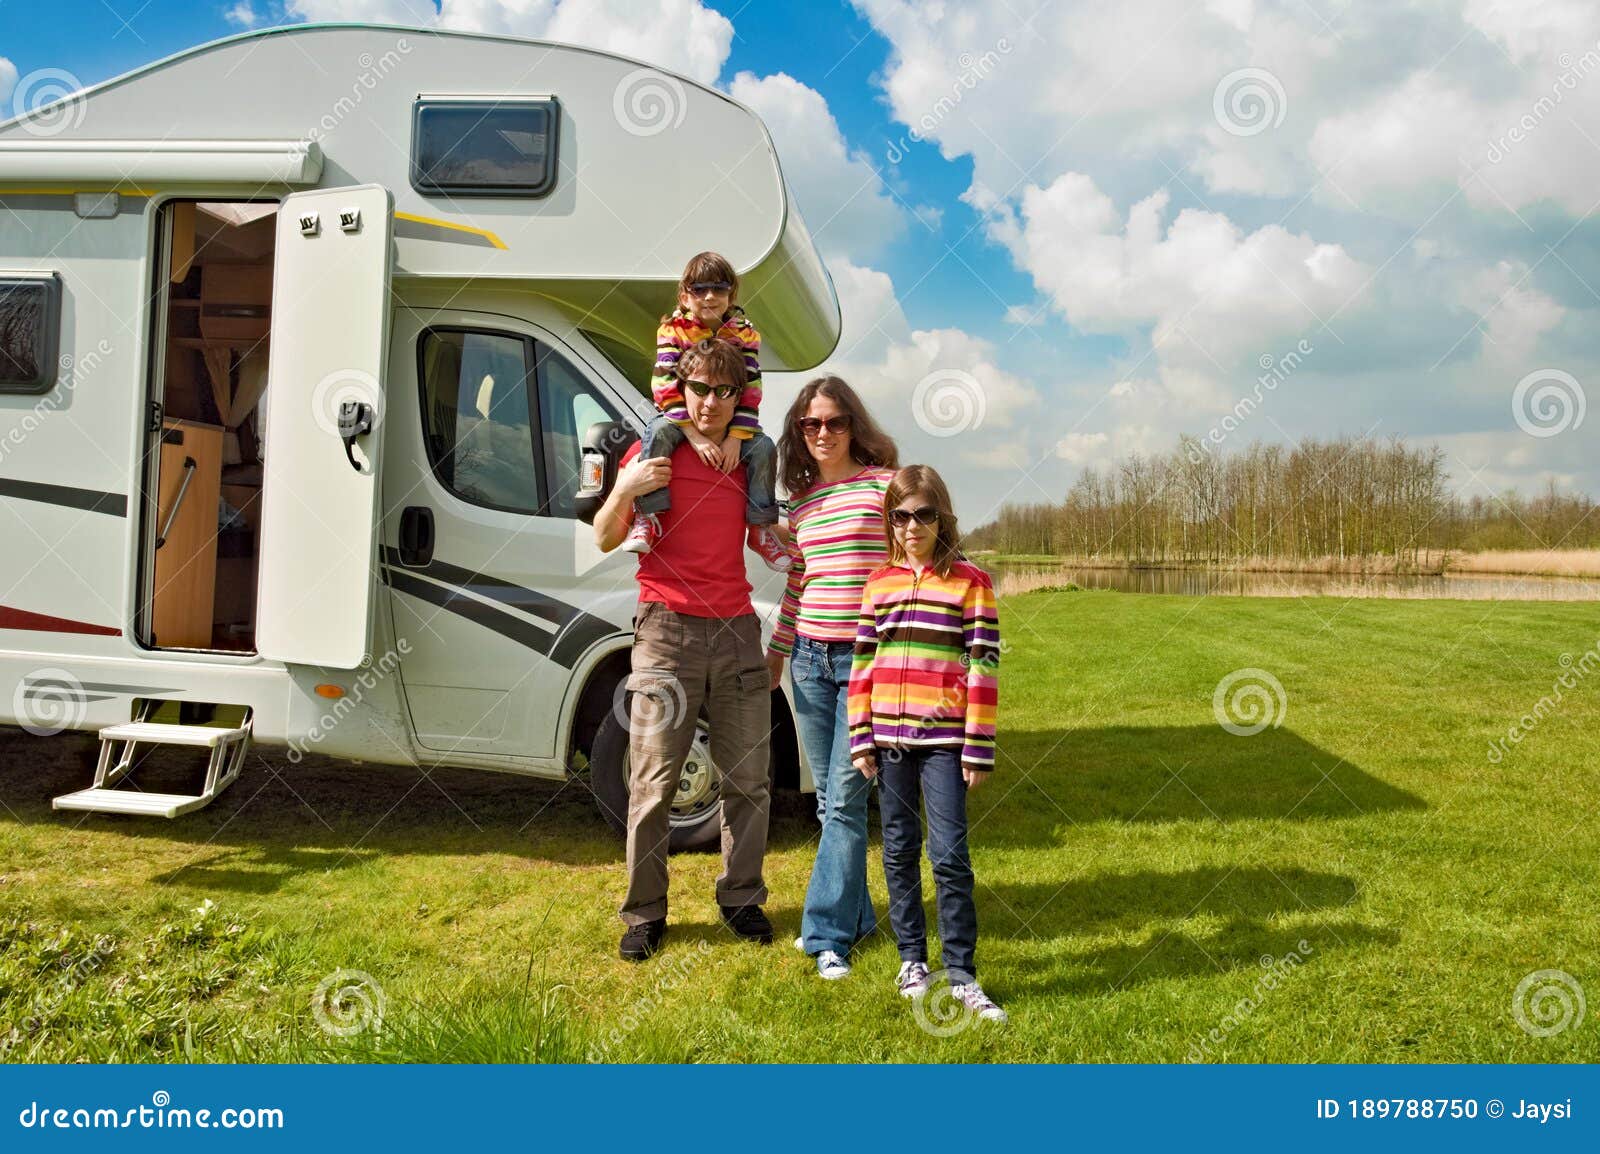 Family Vacation Rv Travel With Kids Stock Photo - Download 